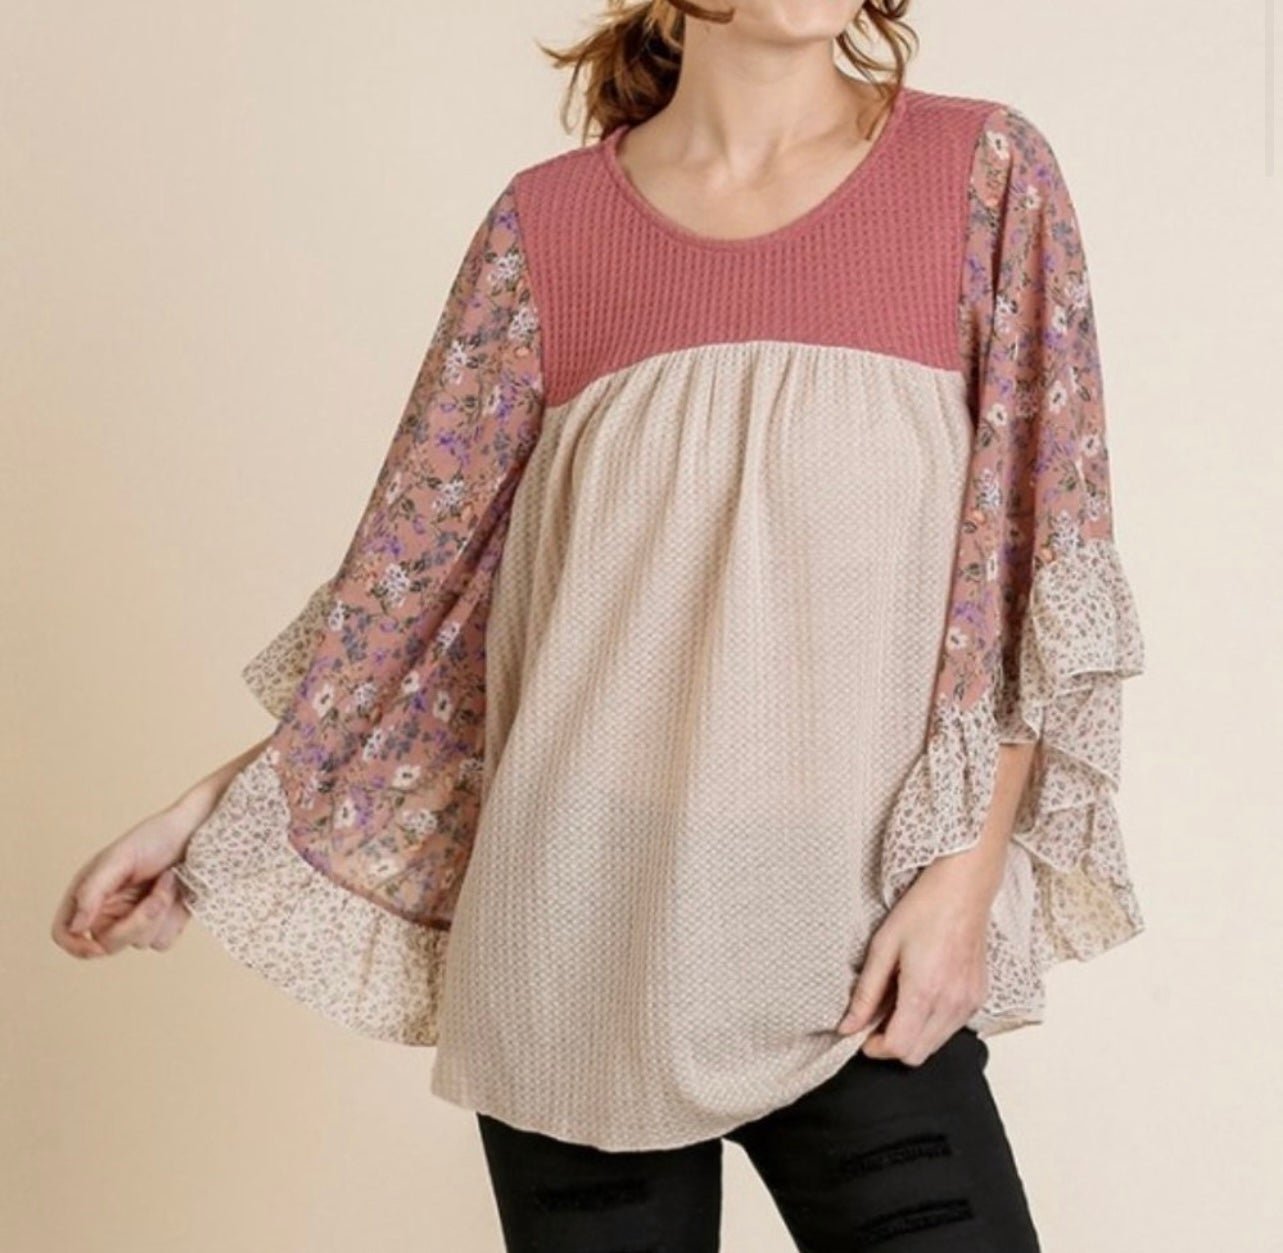 Simple NWT UMGEE  Floral Mixed Print Oversized High Low Bell Ruffle Sleeves Tunic Top Mi5VAwXaH no tax